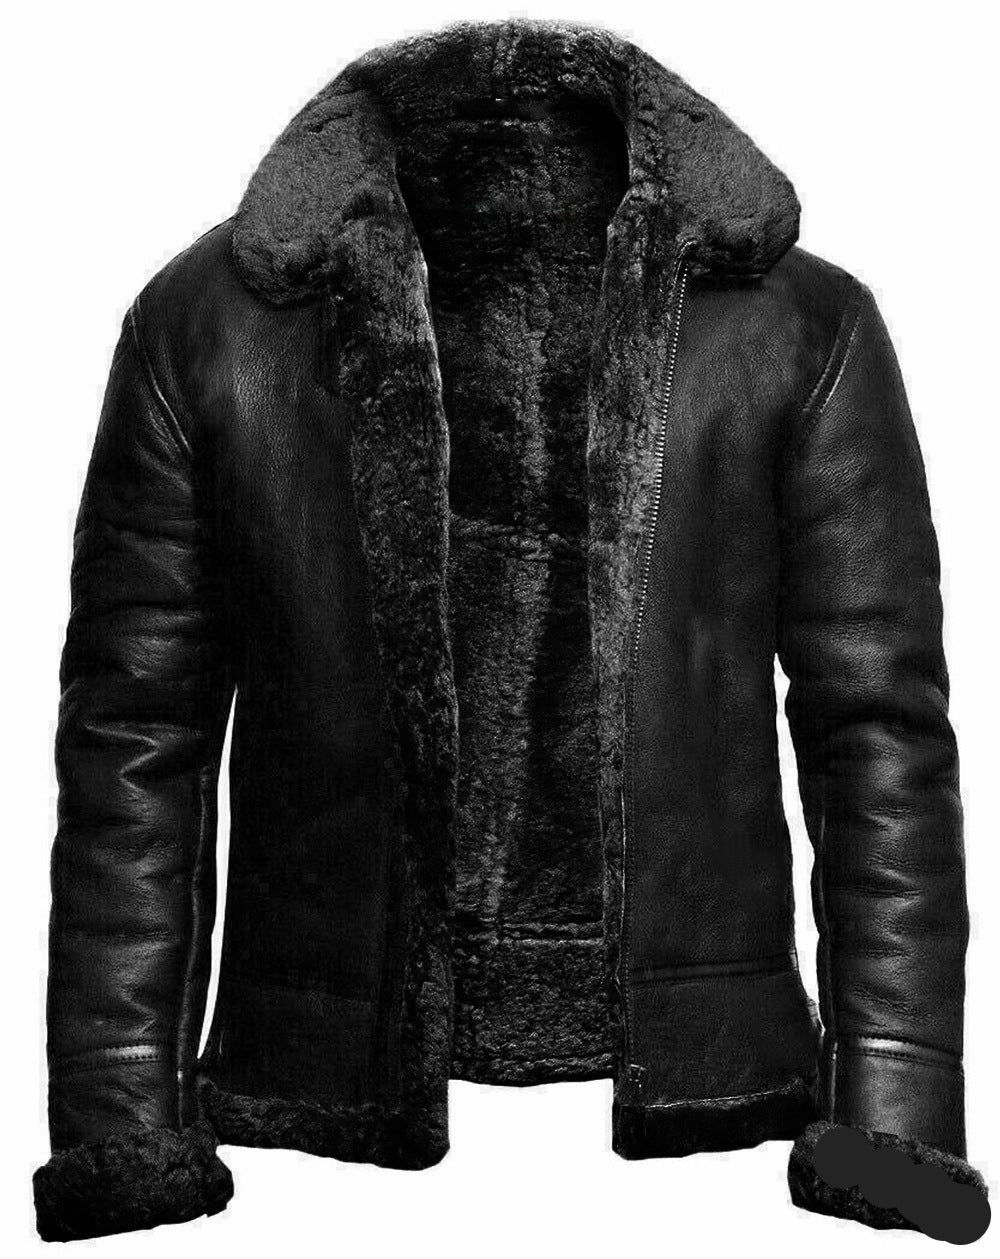 Black Sheep Skin Semi-aniline Fully Faux Fur Lined Leather Coat only